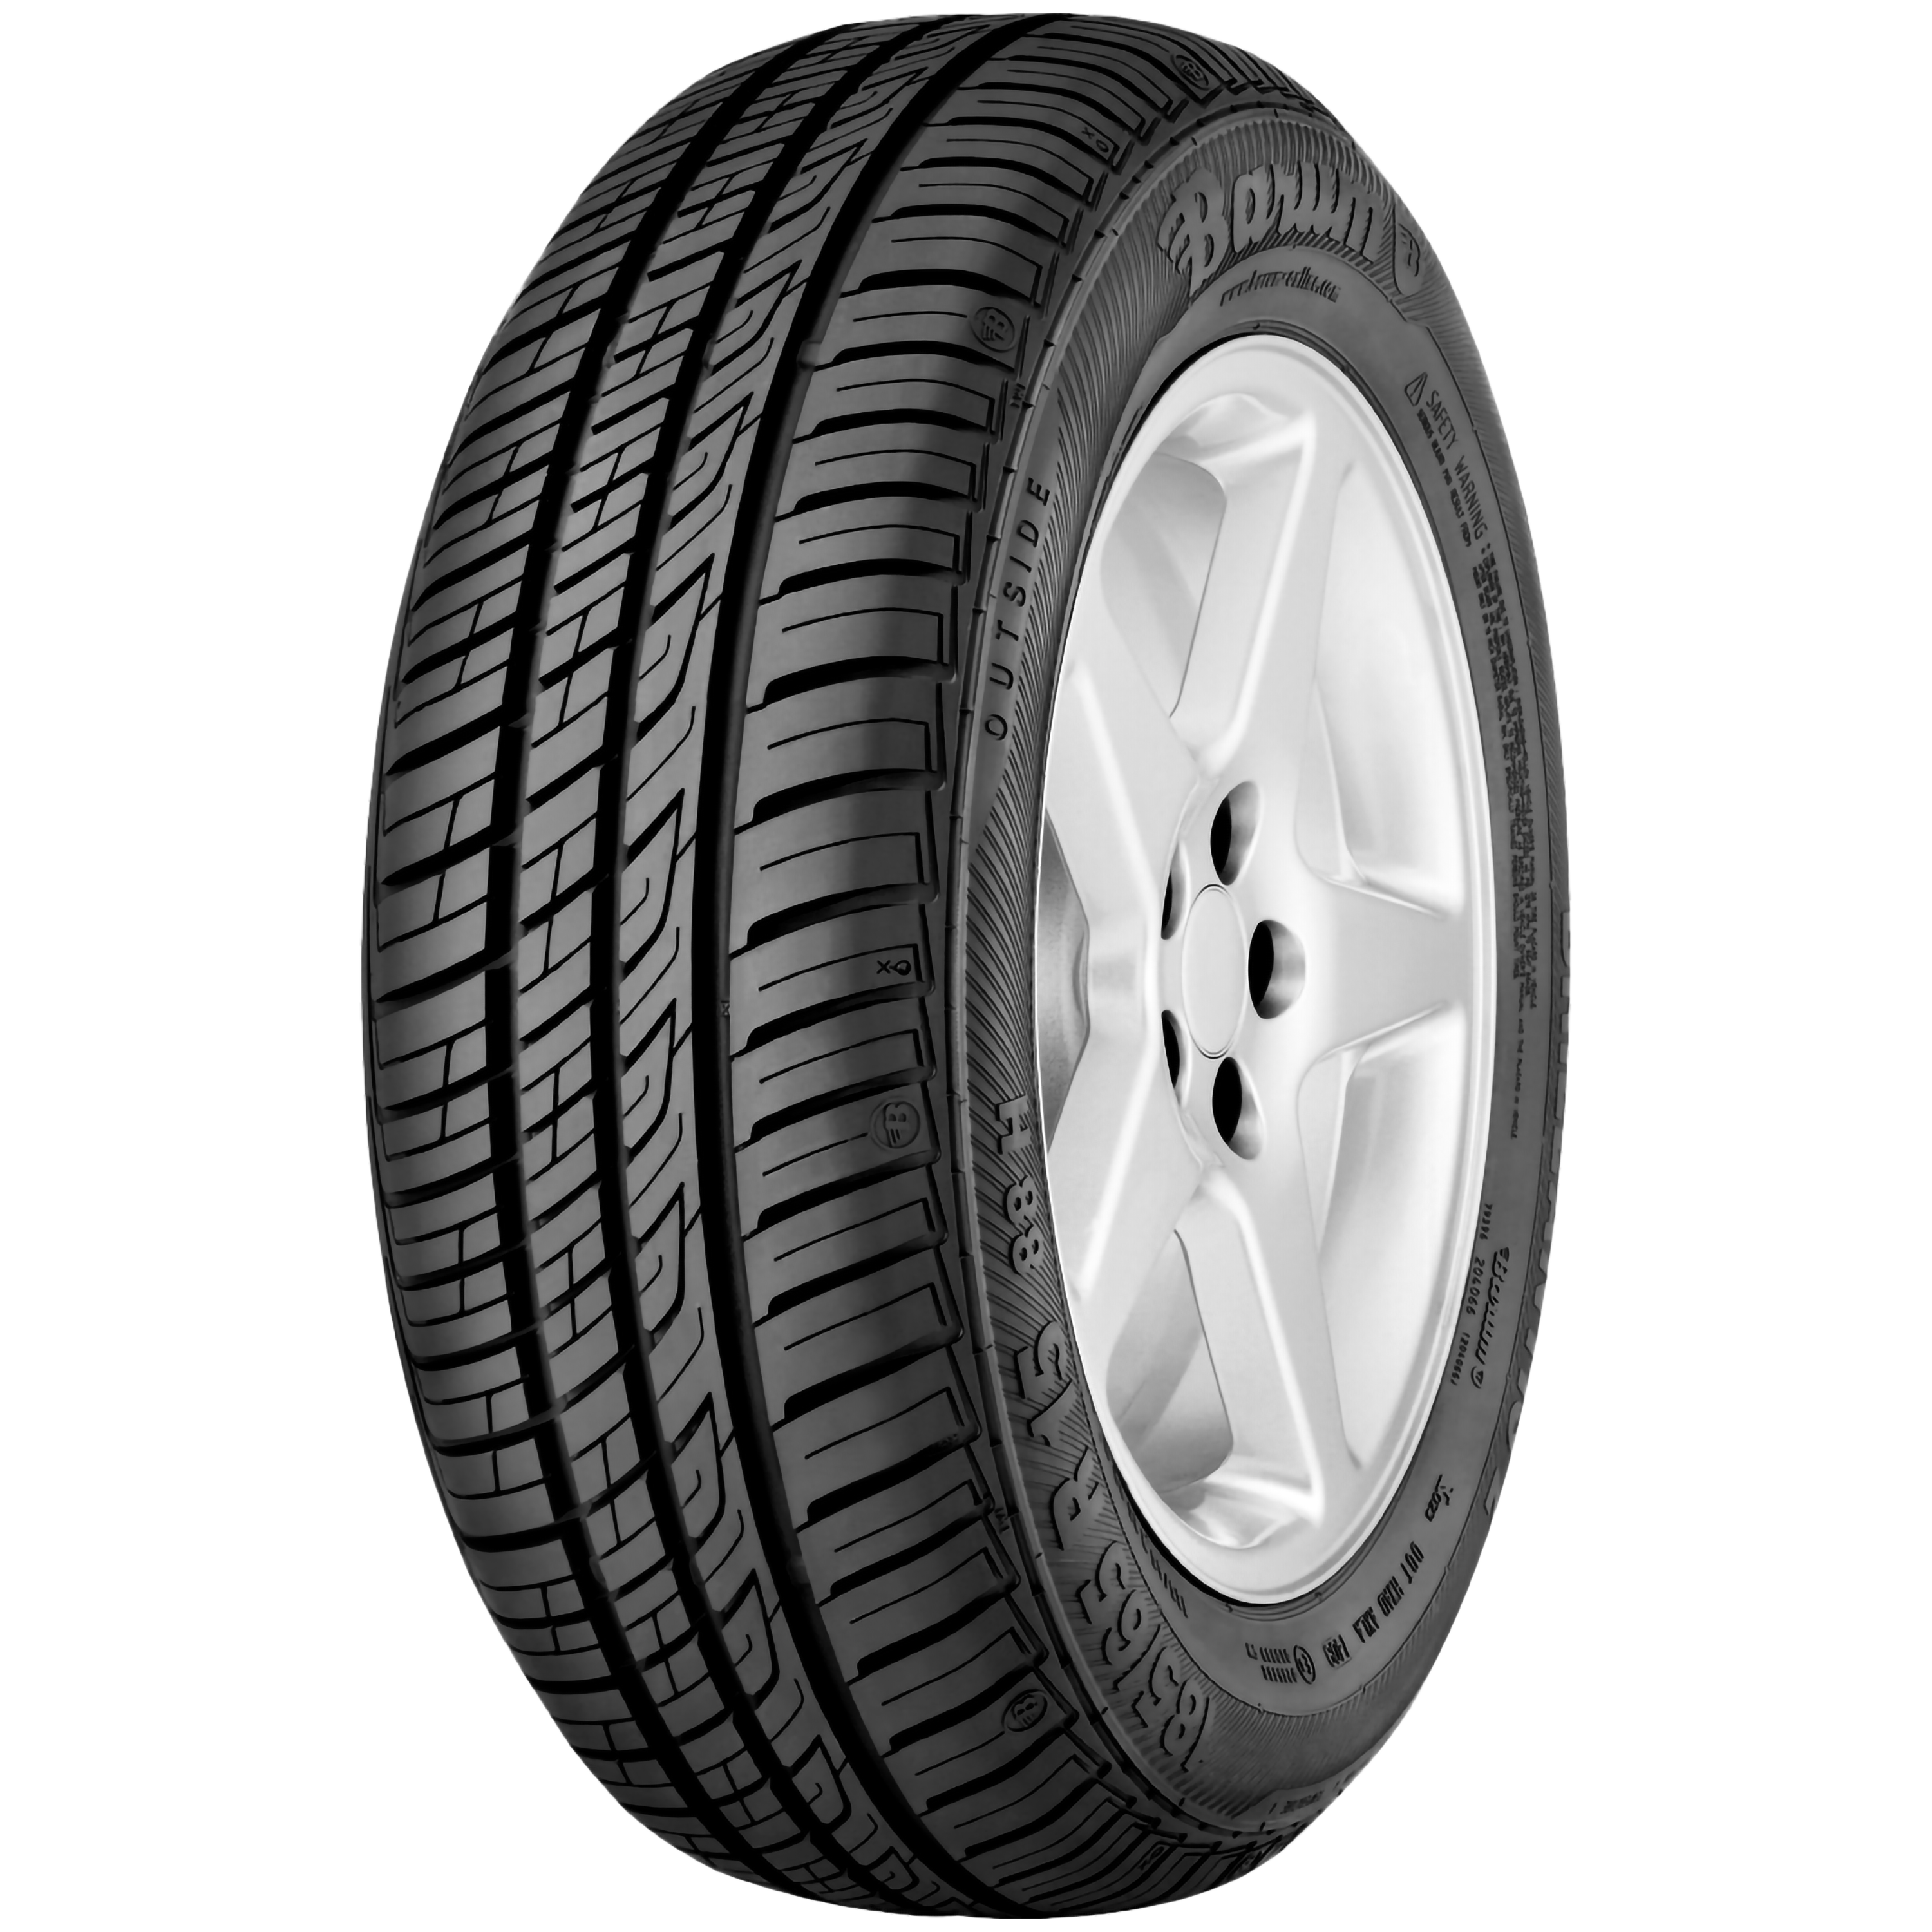 Brillantis with high car mileage | summer for long Barum Barum tyre - & your SUV life The 2